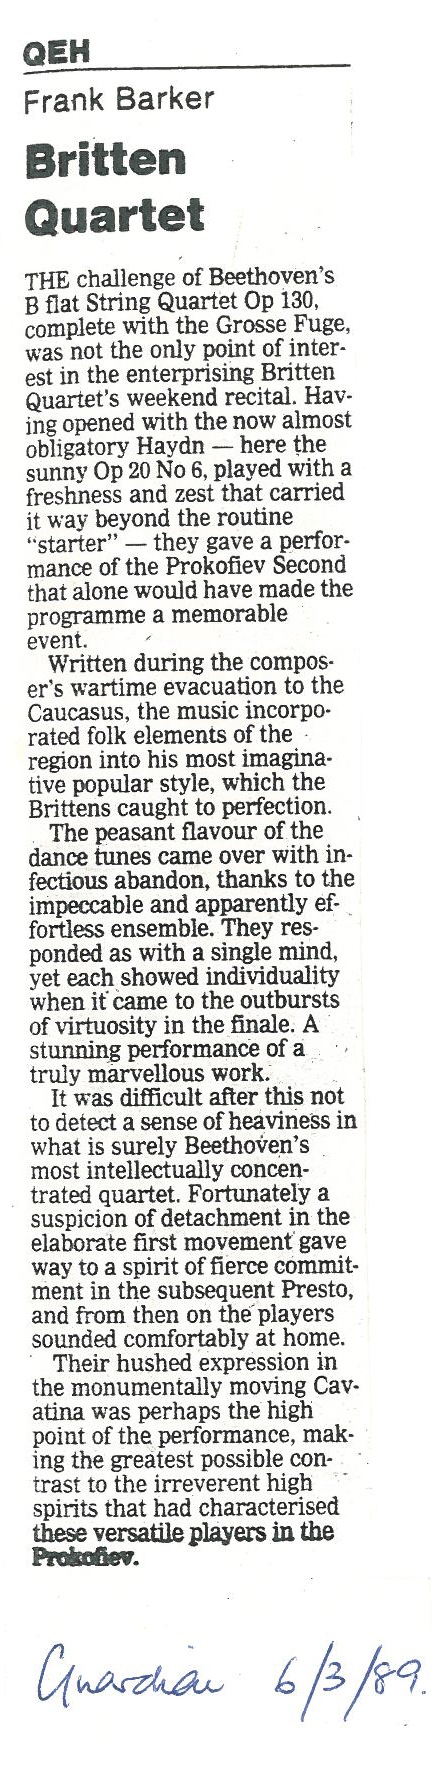 Review, 1989, The Guardian